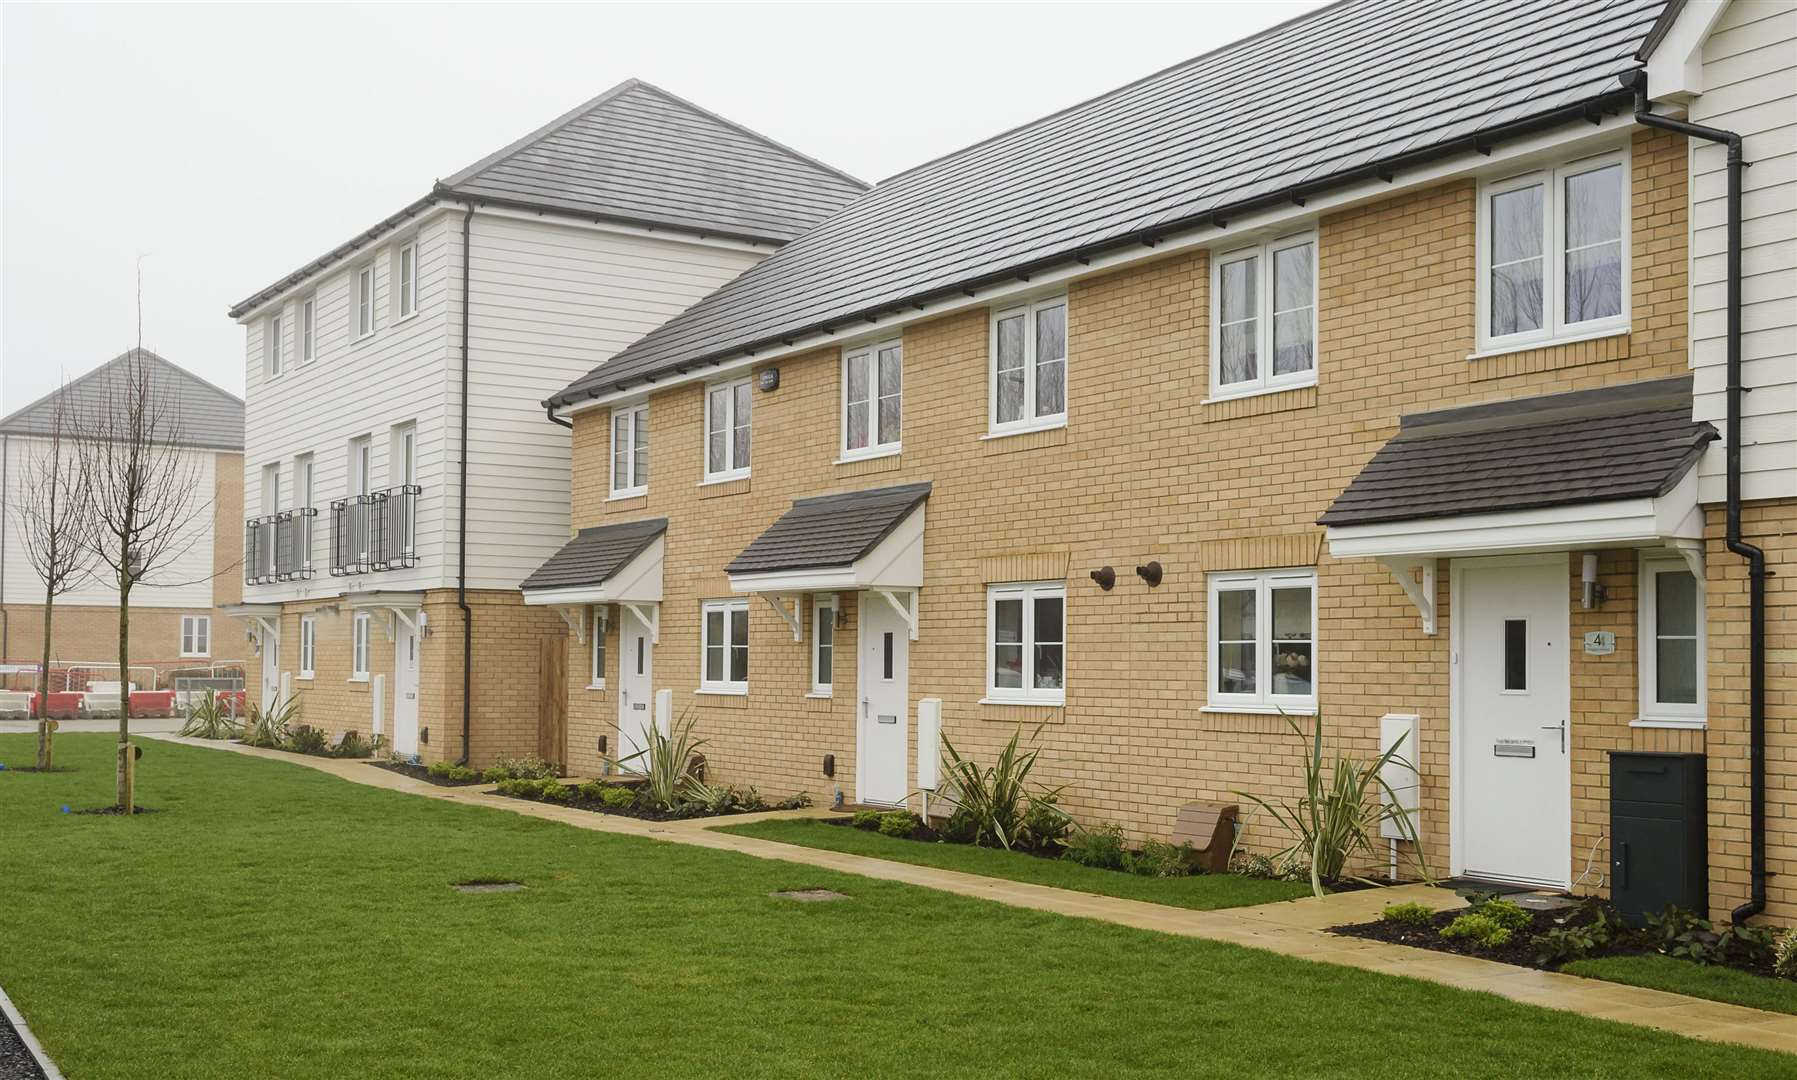 Bovis Homes' Orchard Fields development is one of the estates recently built off Hermitage Lane